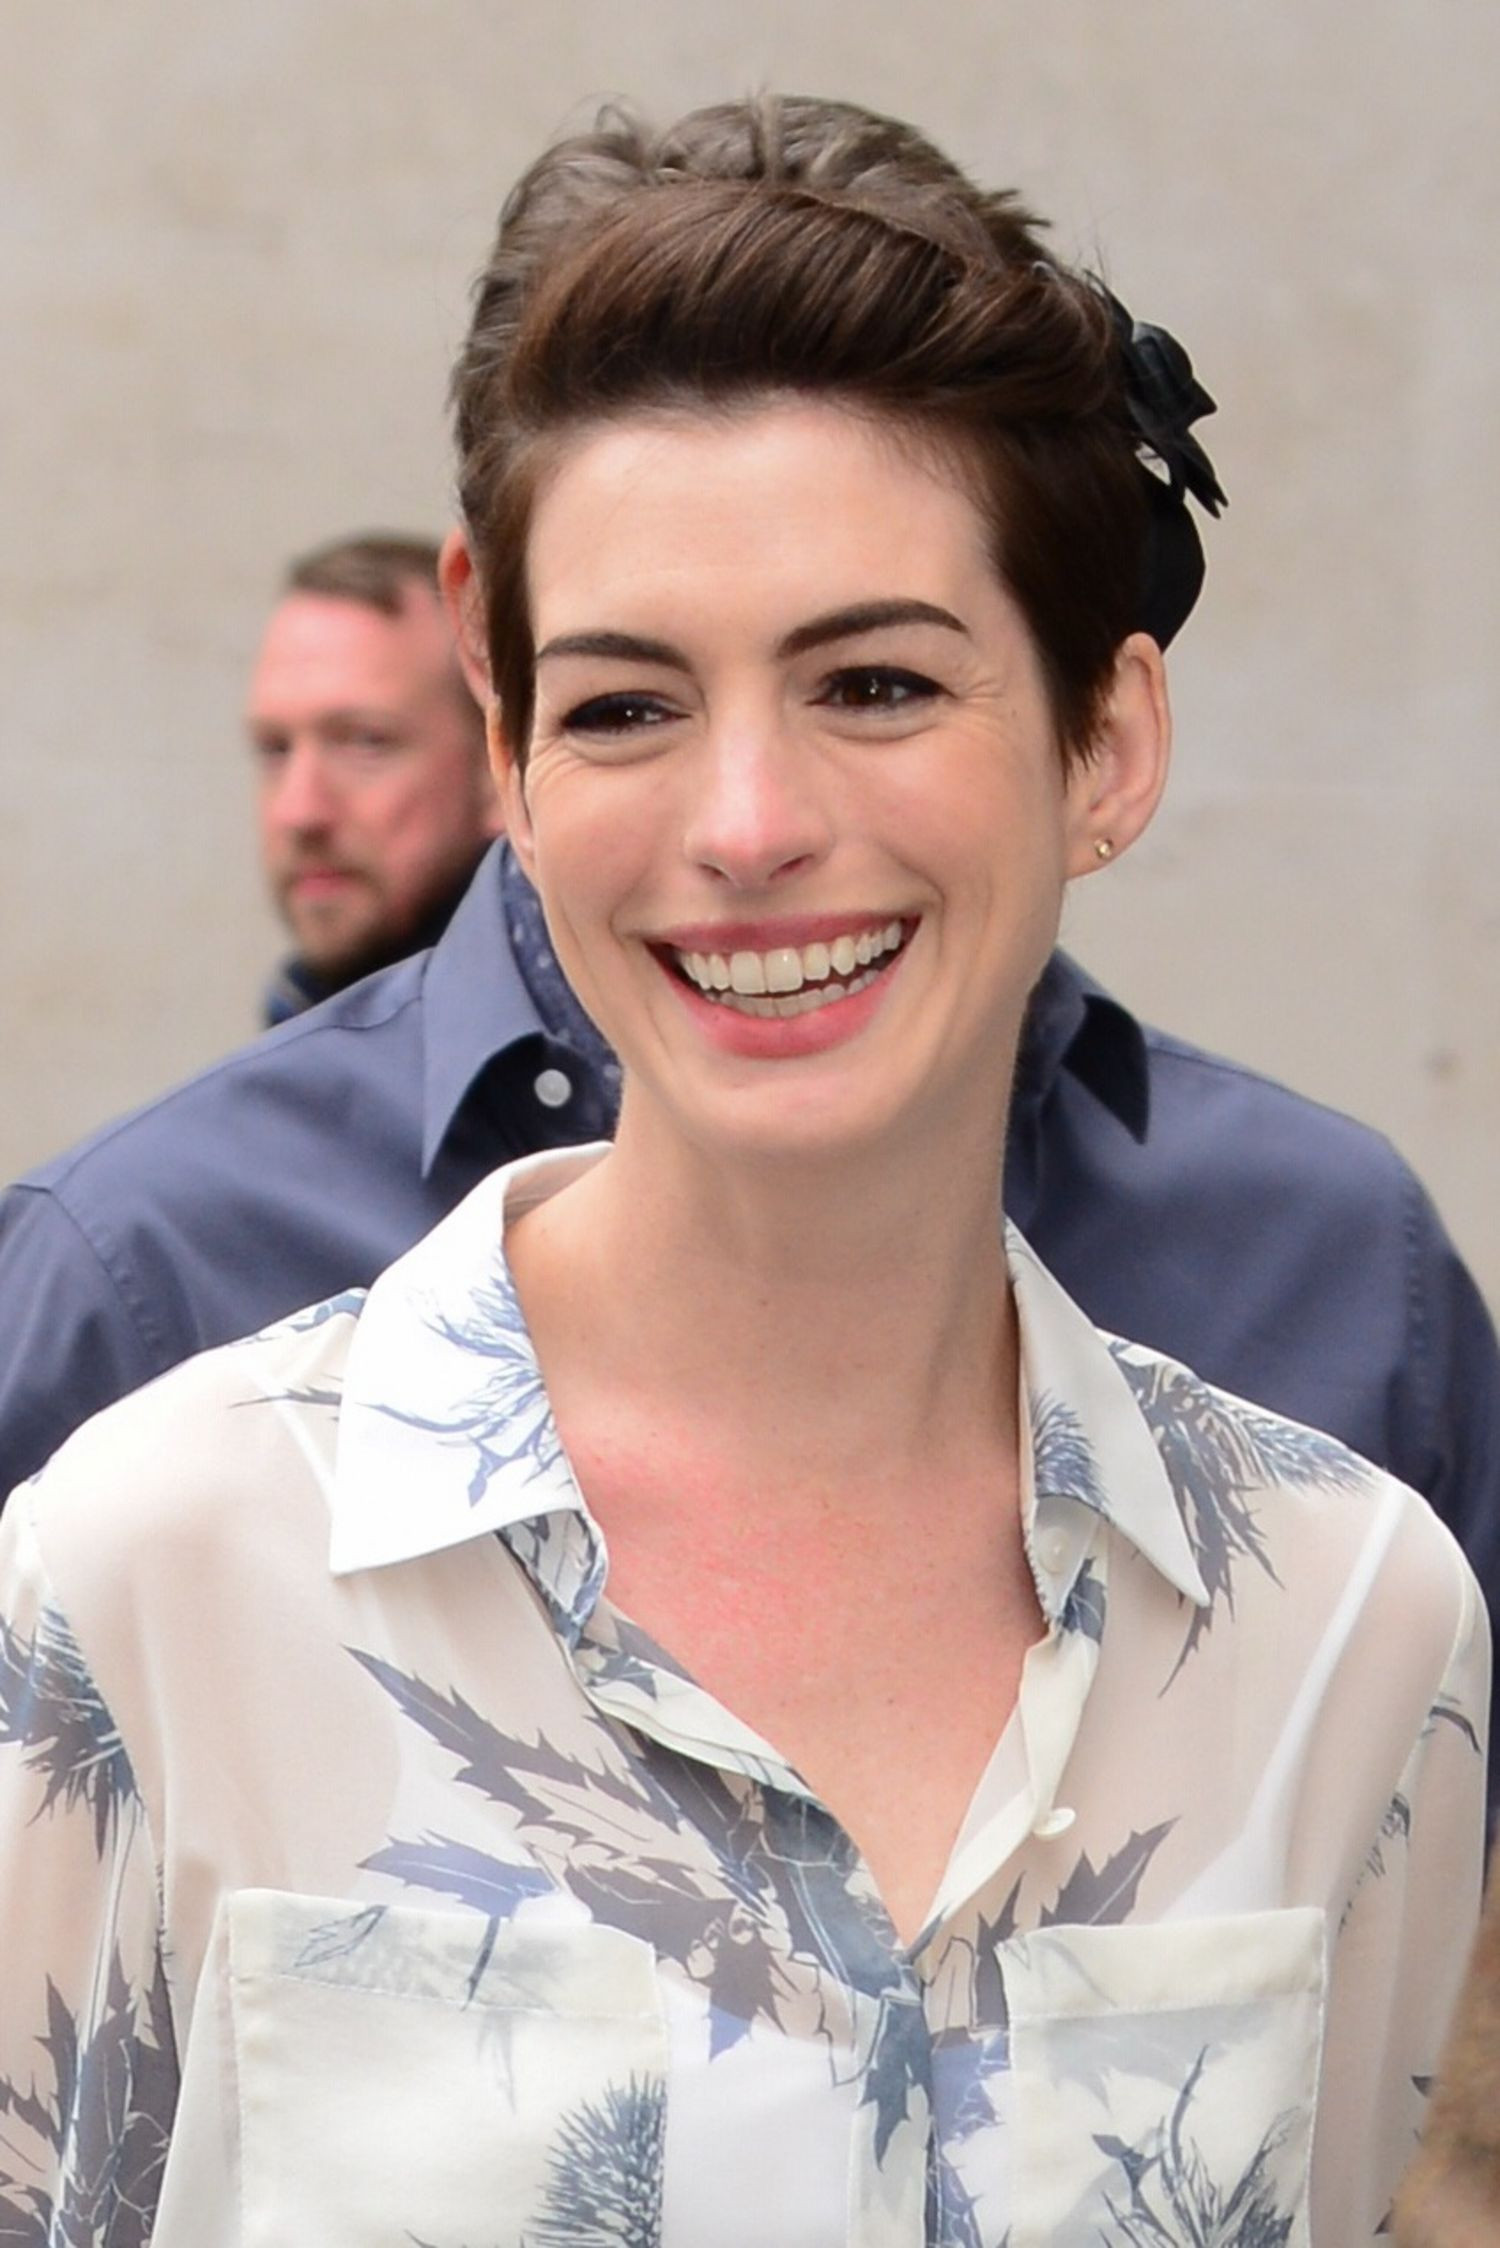 Hairstyles While Growing Out Short Hair
 Hairstyle Ideas How Anne Hathaway s Growing Out Her Pixie